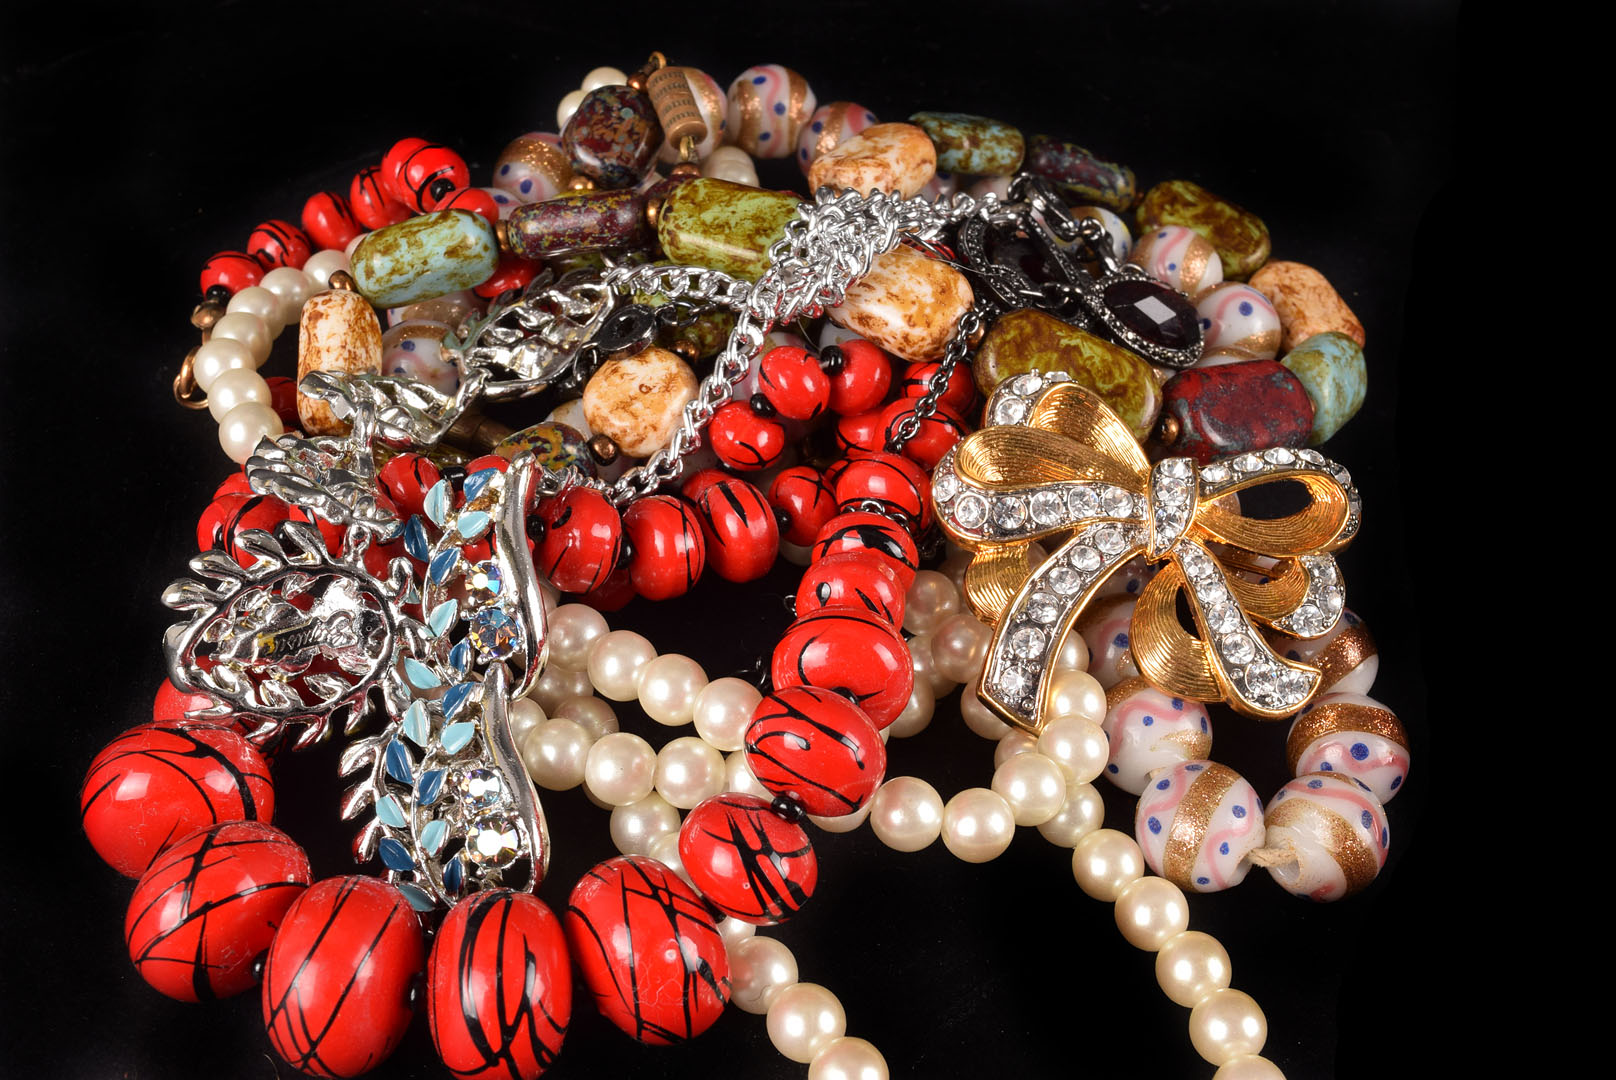 A quantity of costume jewellery, including simulated pearls, brooches, and other items